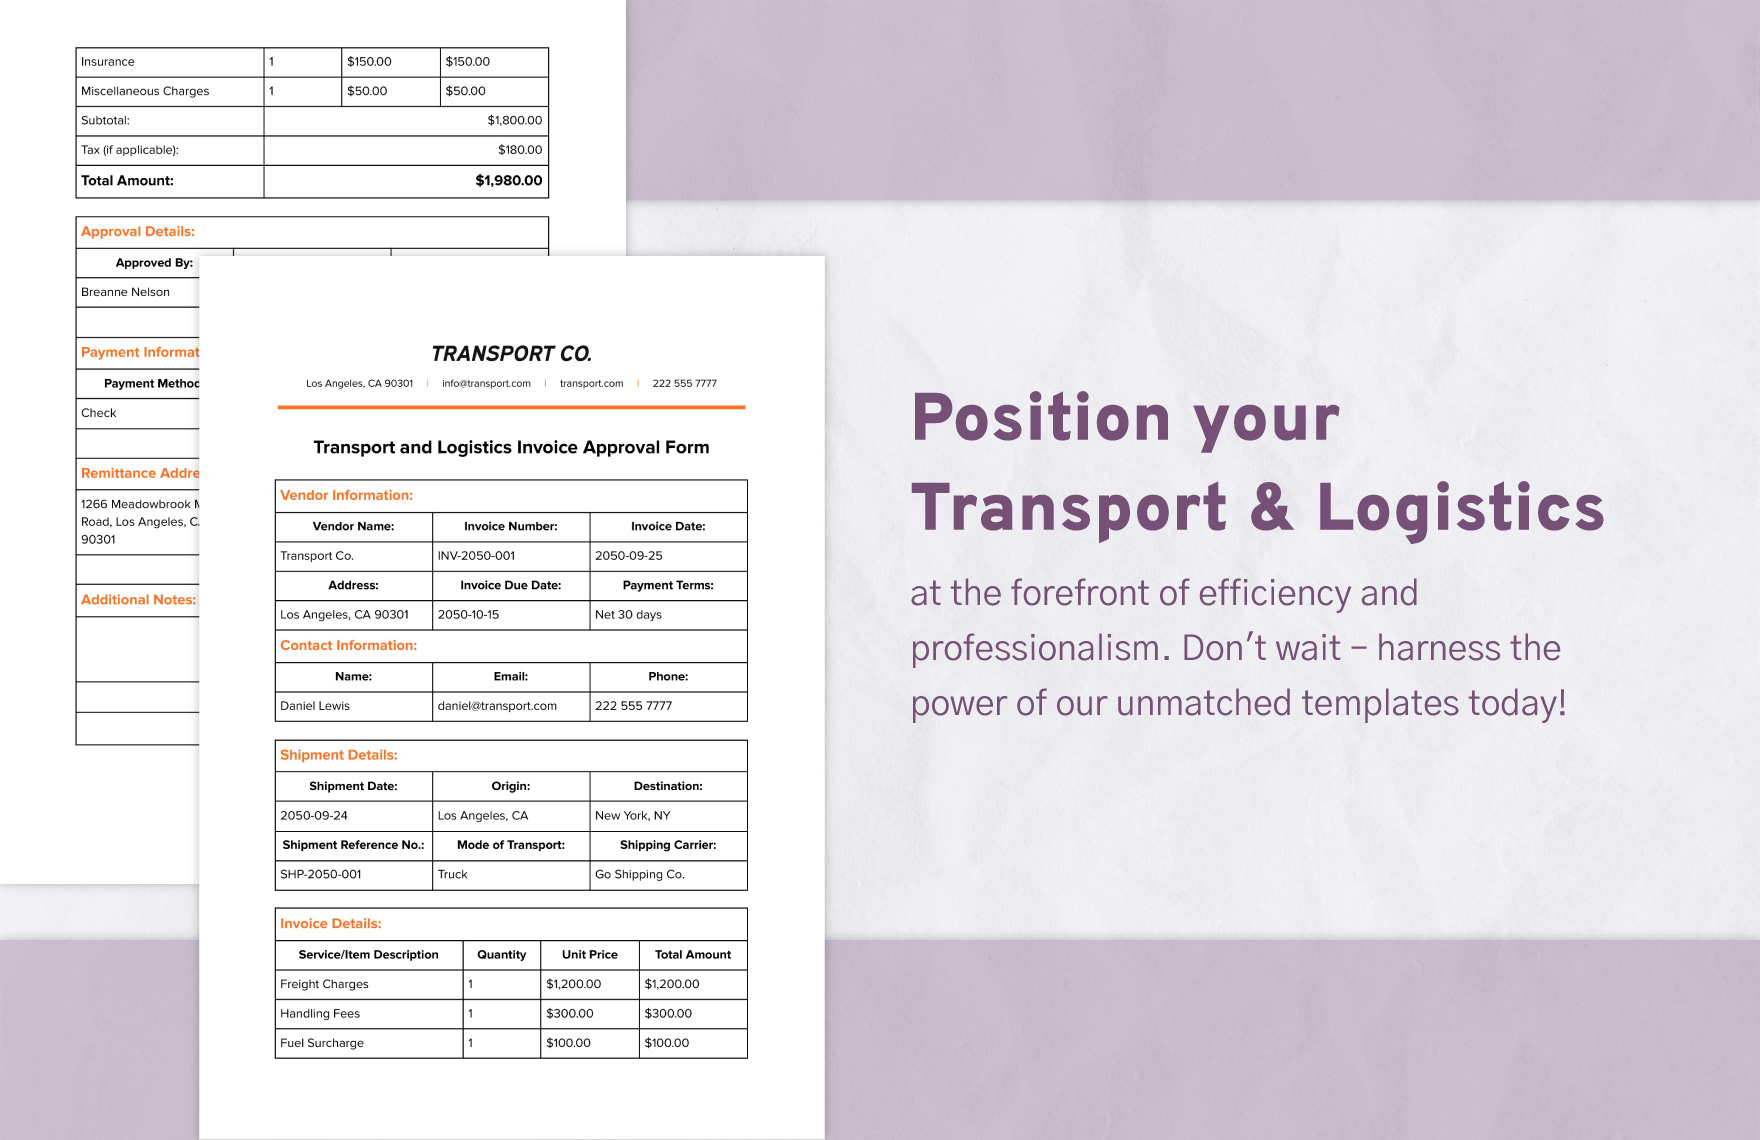 Transport and Logistics Invoice Approval Form Template